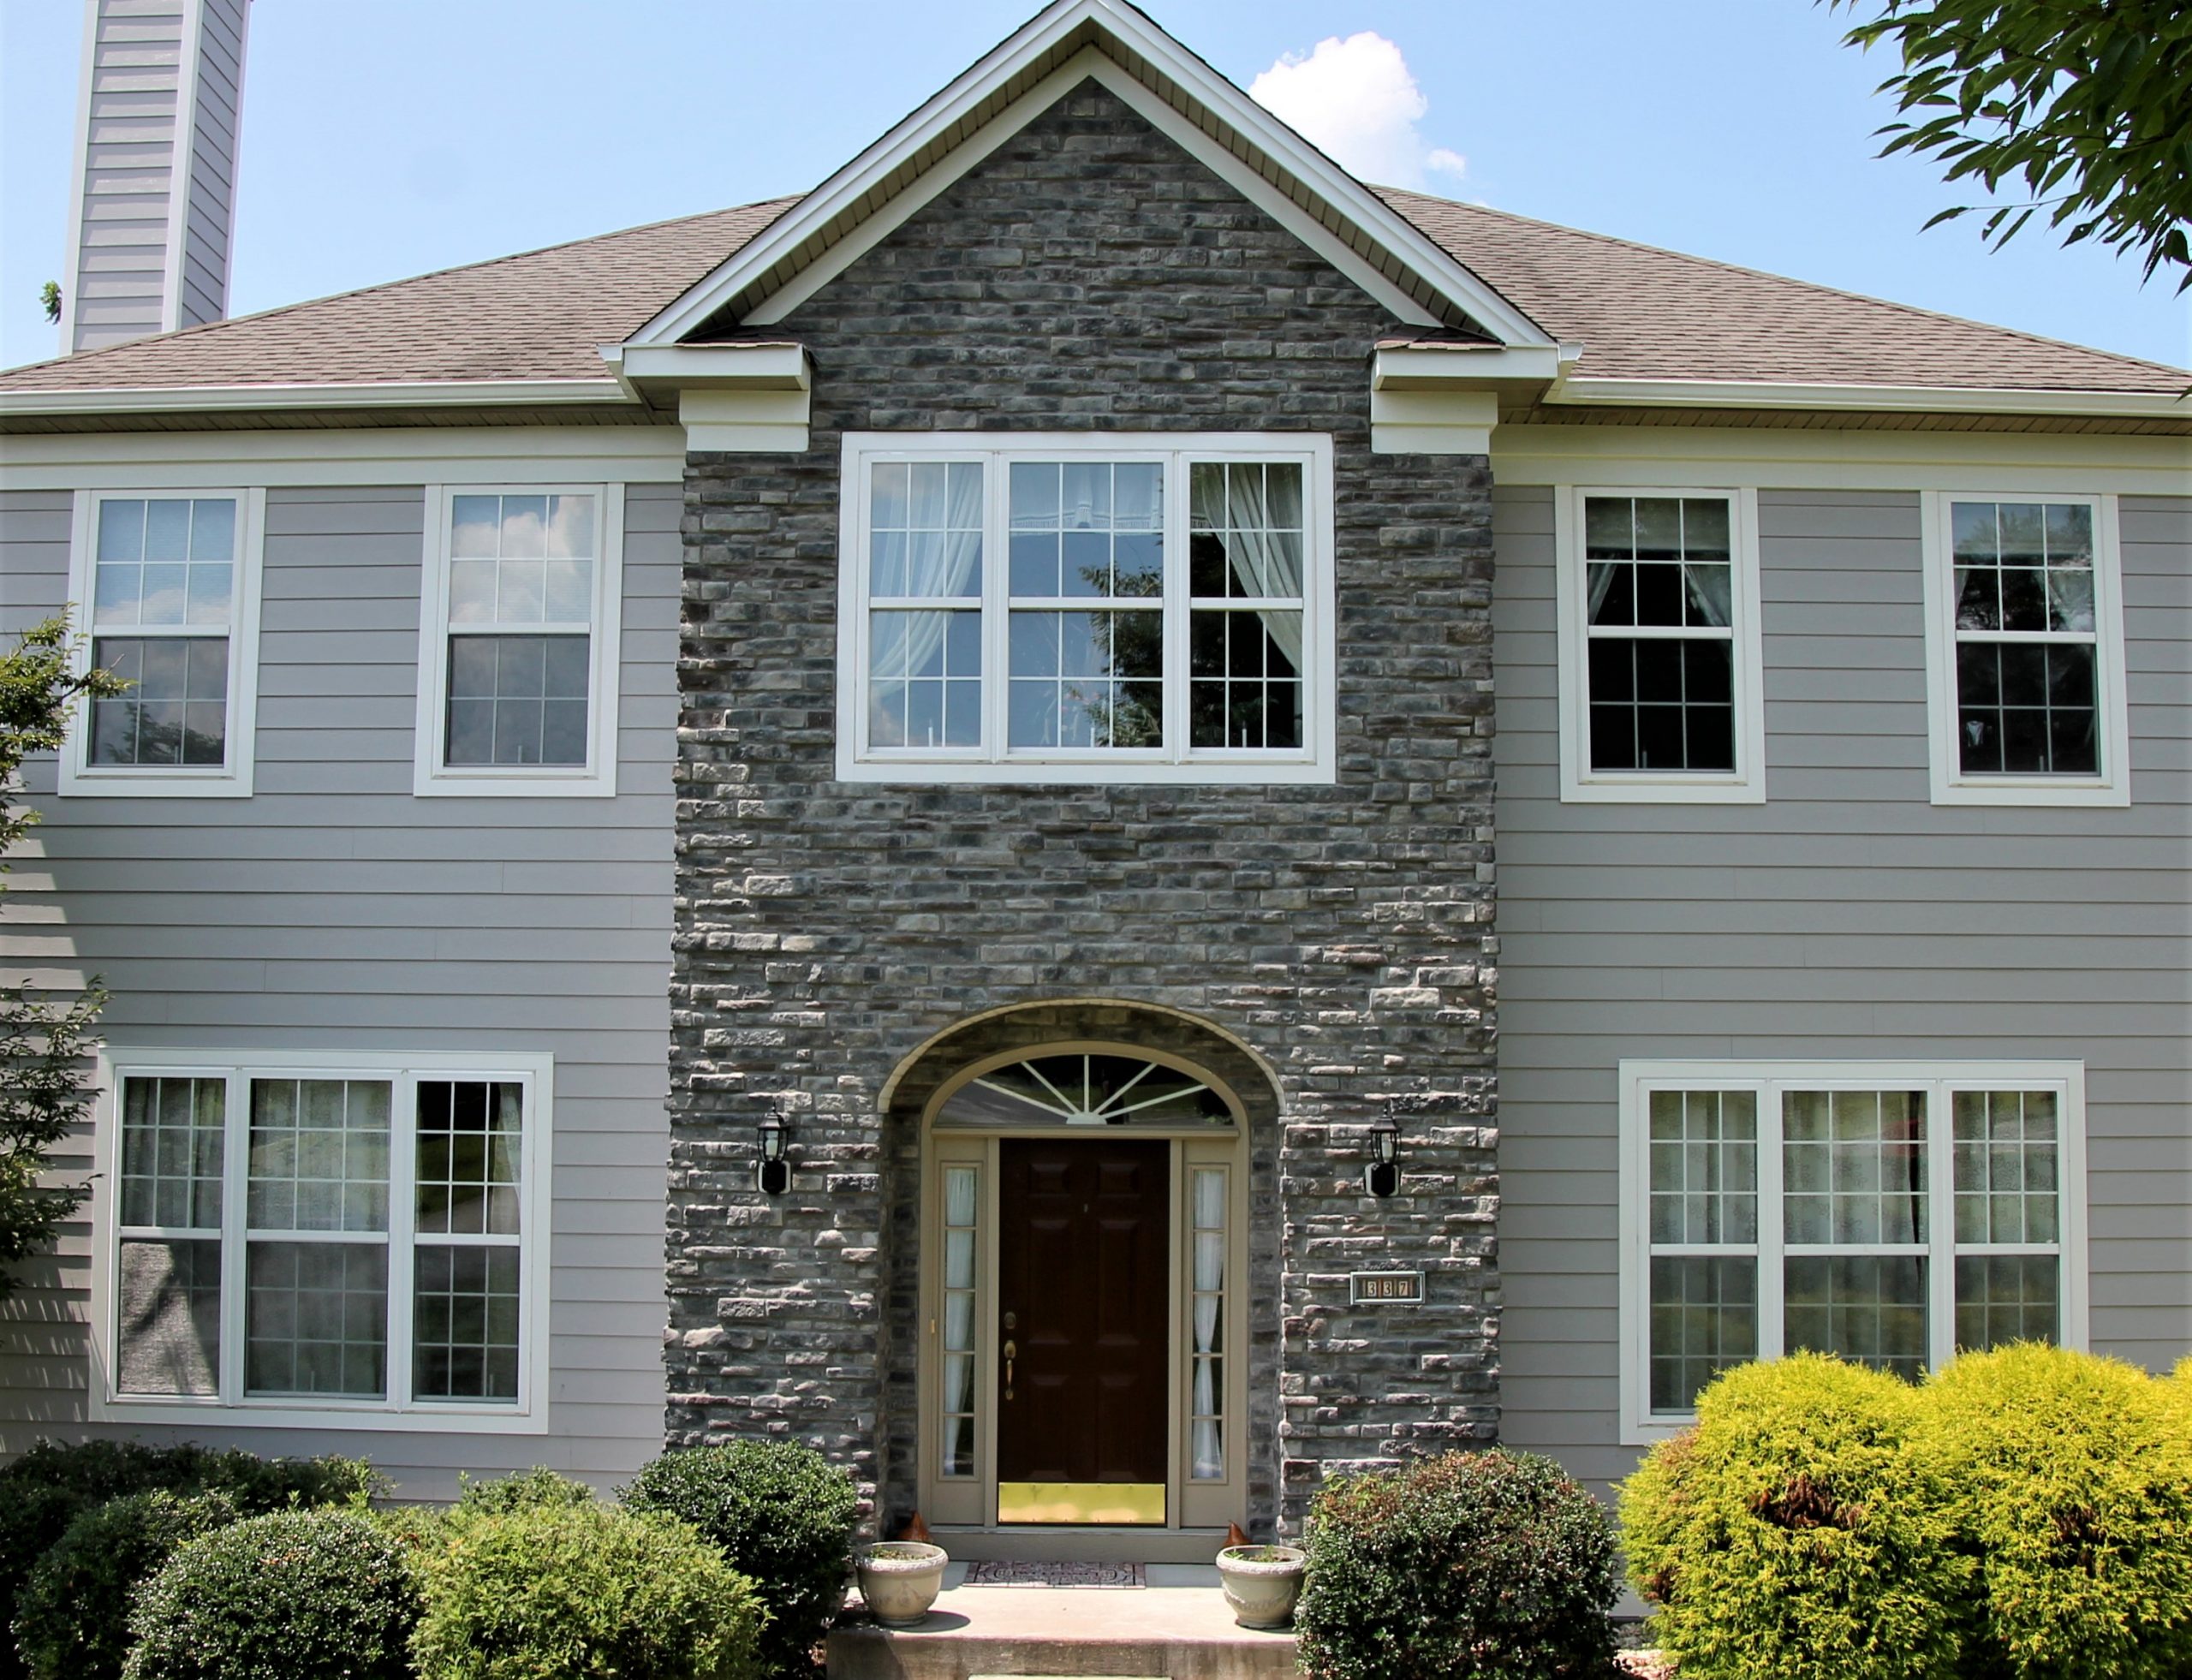 Home exterior with stone veneer and gray siding